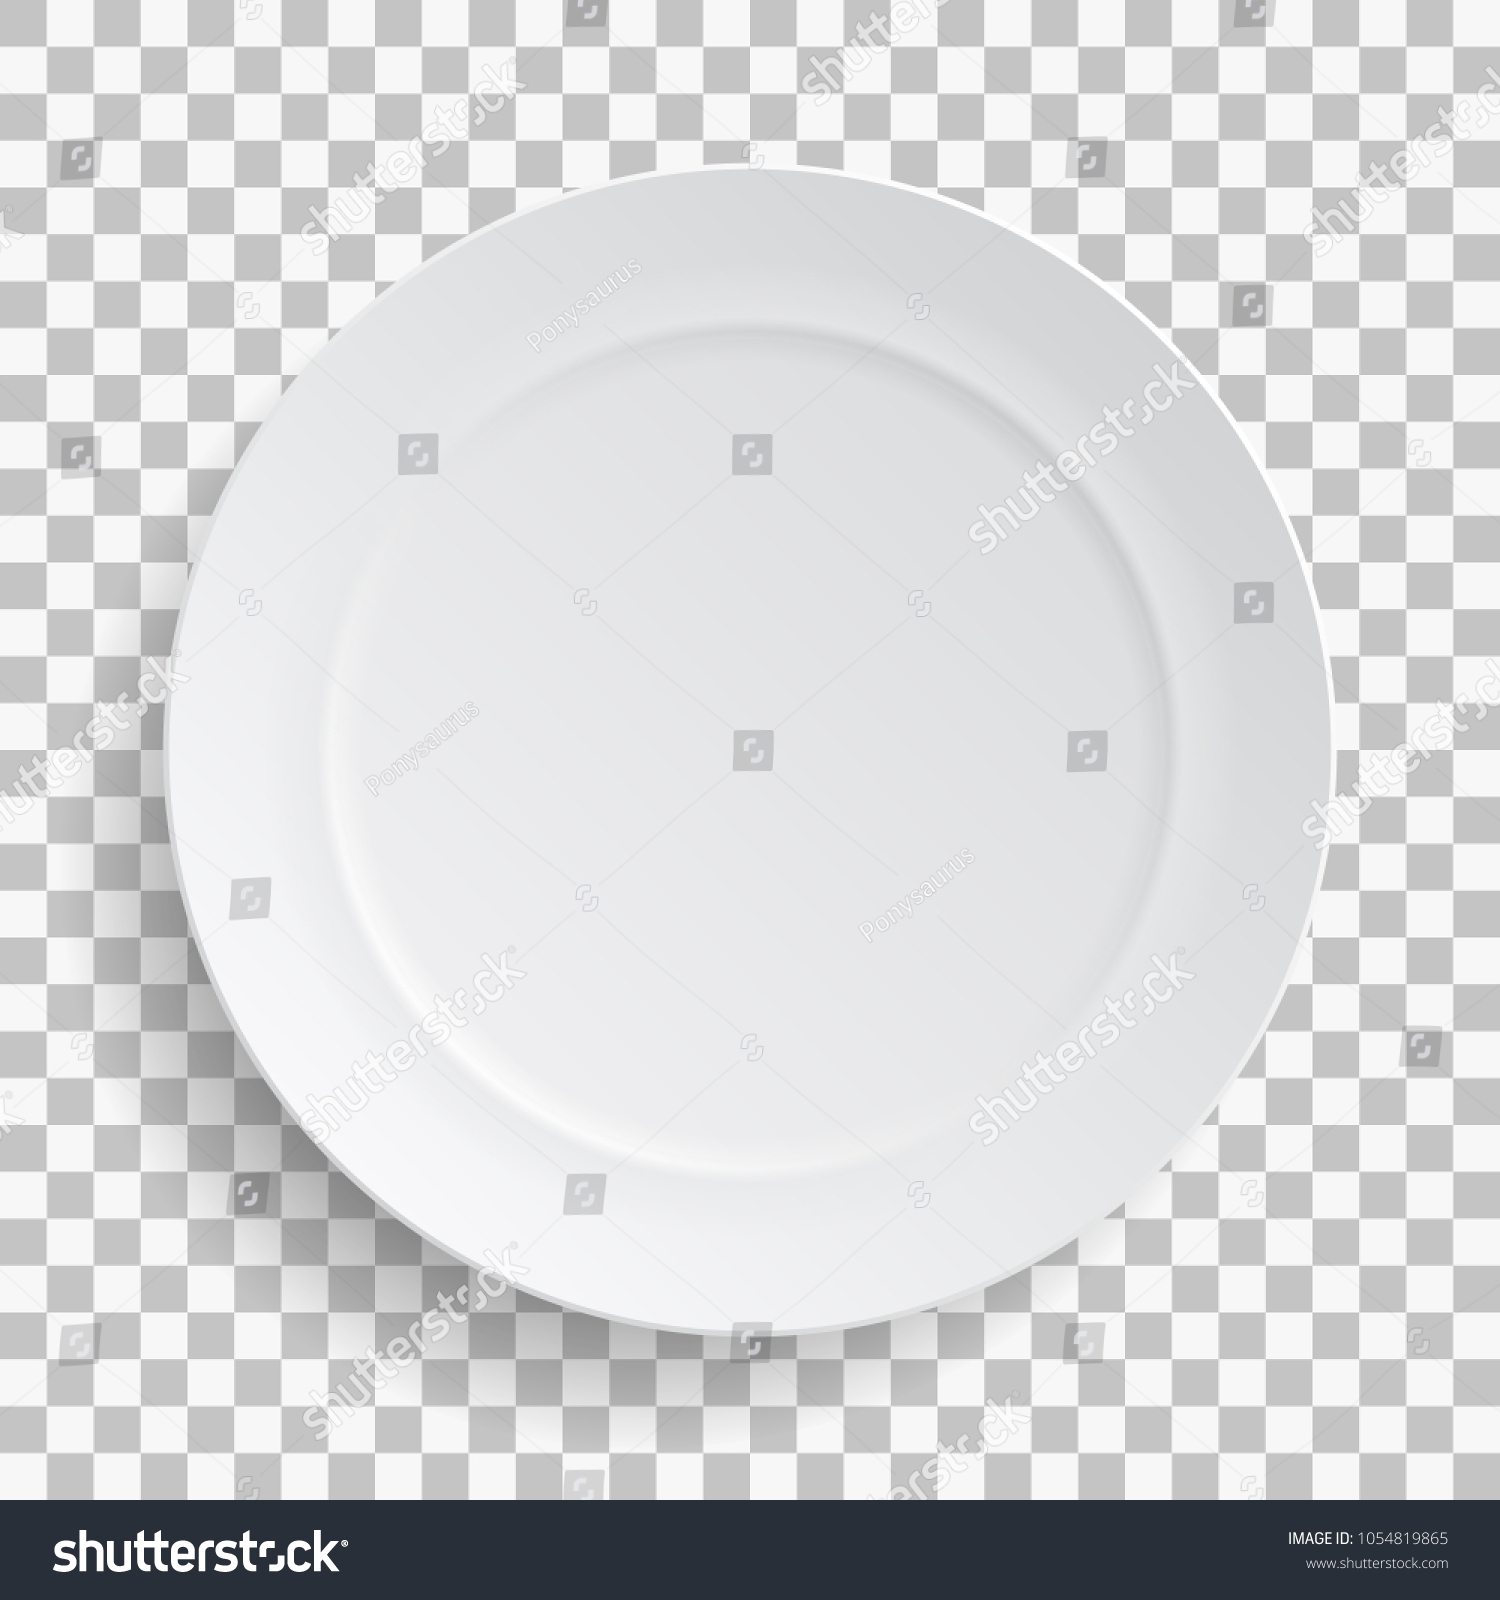 White dish plate isolated on transparent background. Kitchen dishes for food, kitchen, porcelain dishware. Vector illustration for your product, tableware design element. #1054819865